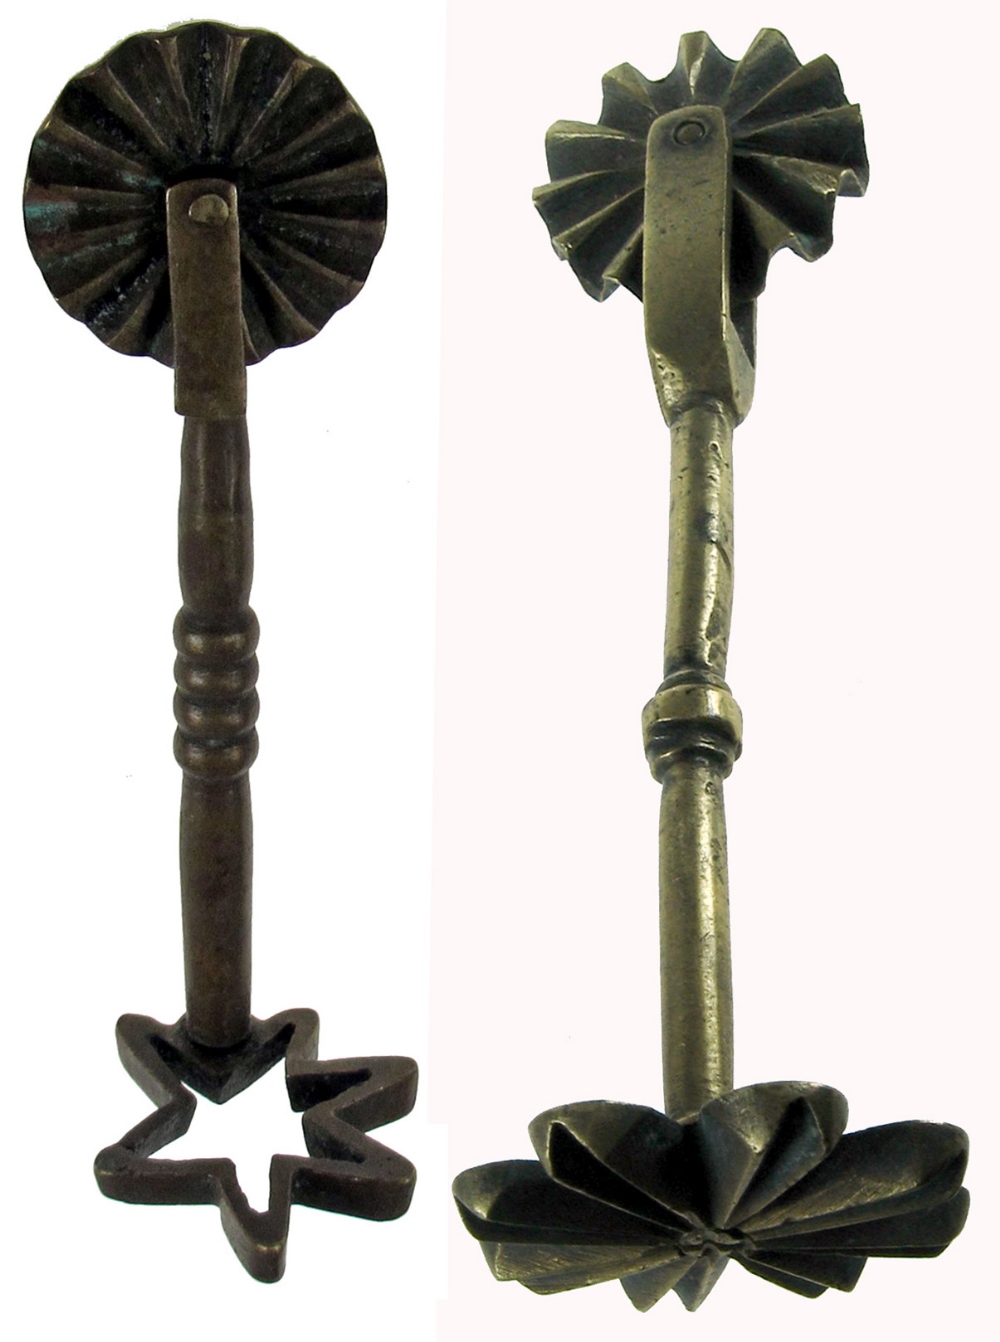 TWO 19TH/EARLY 20THCENTURY BRASS PASTRY JIGGERS, each with wheel, one having a six-pointed star-